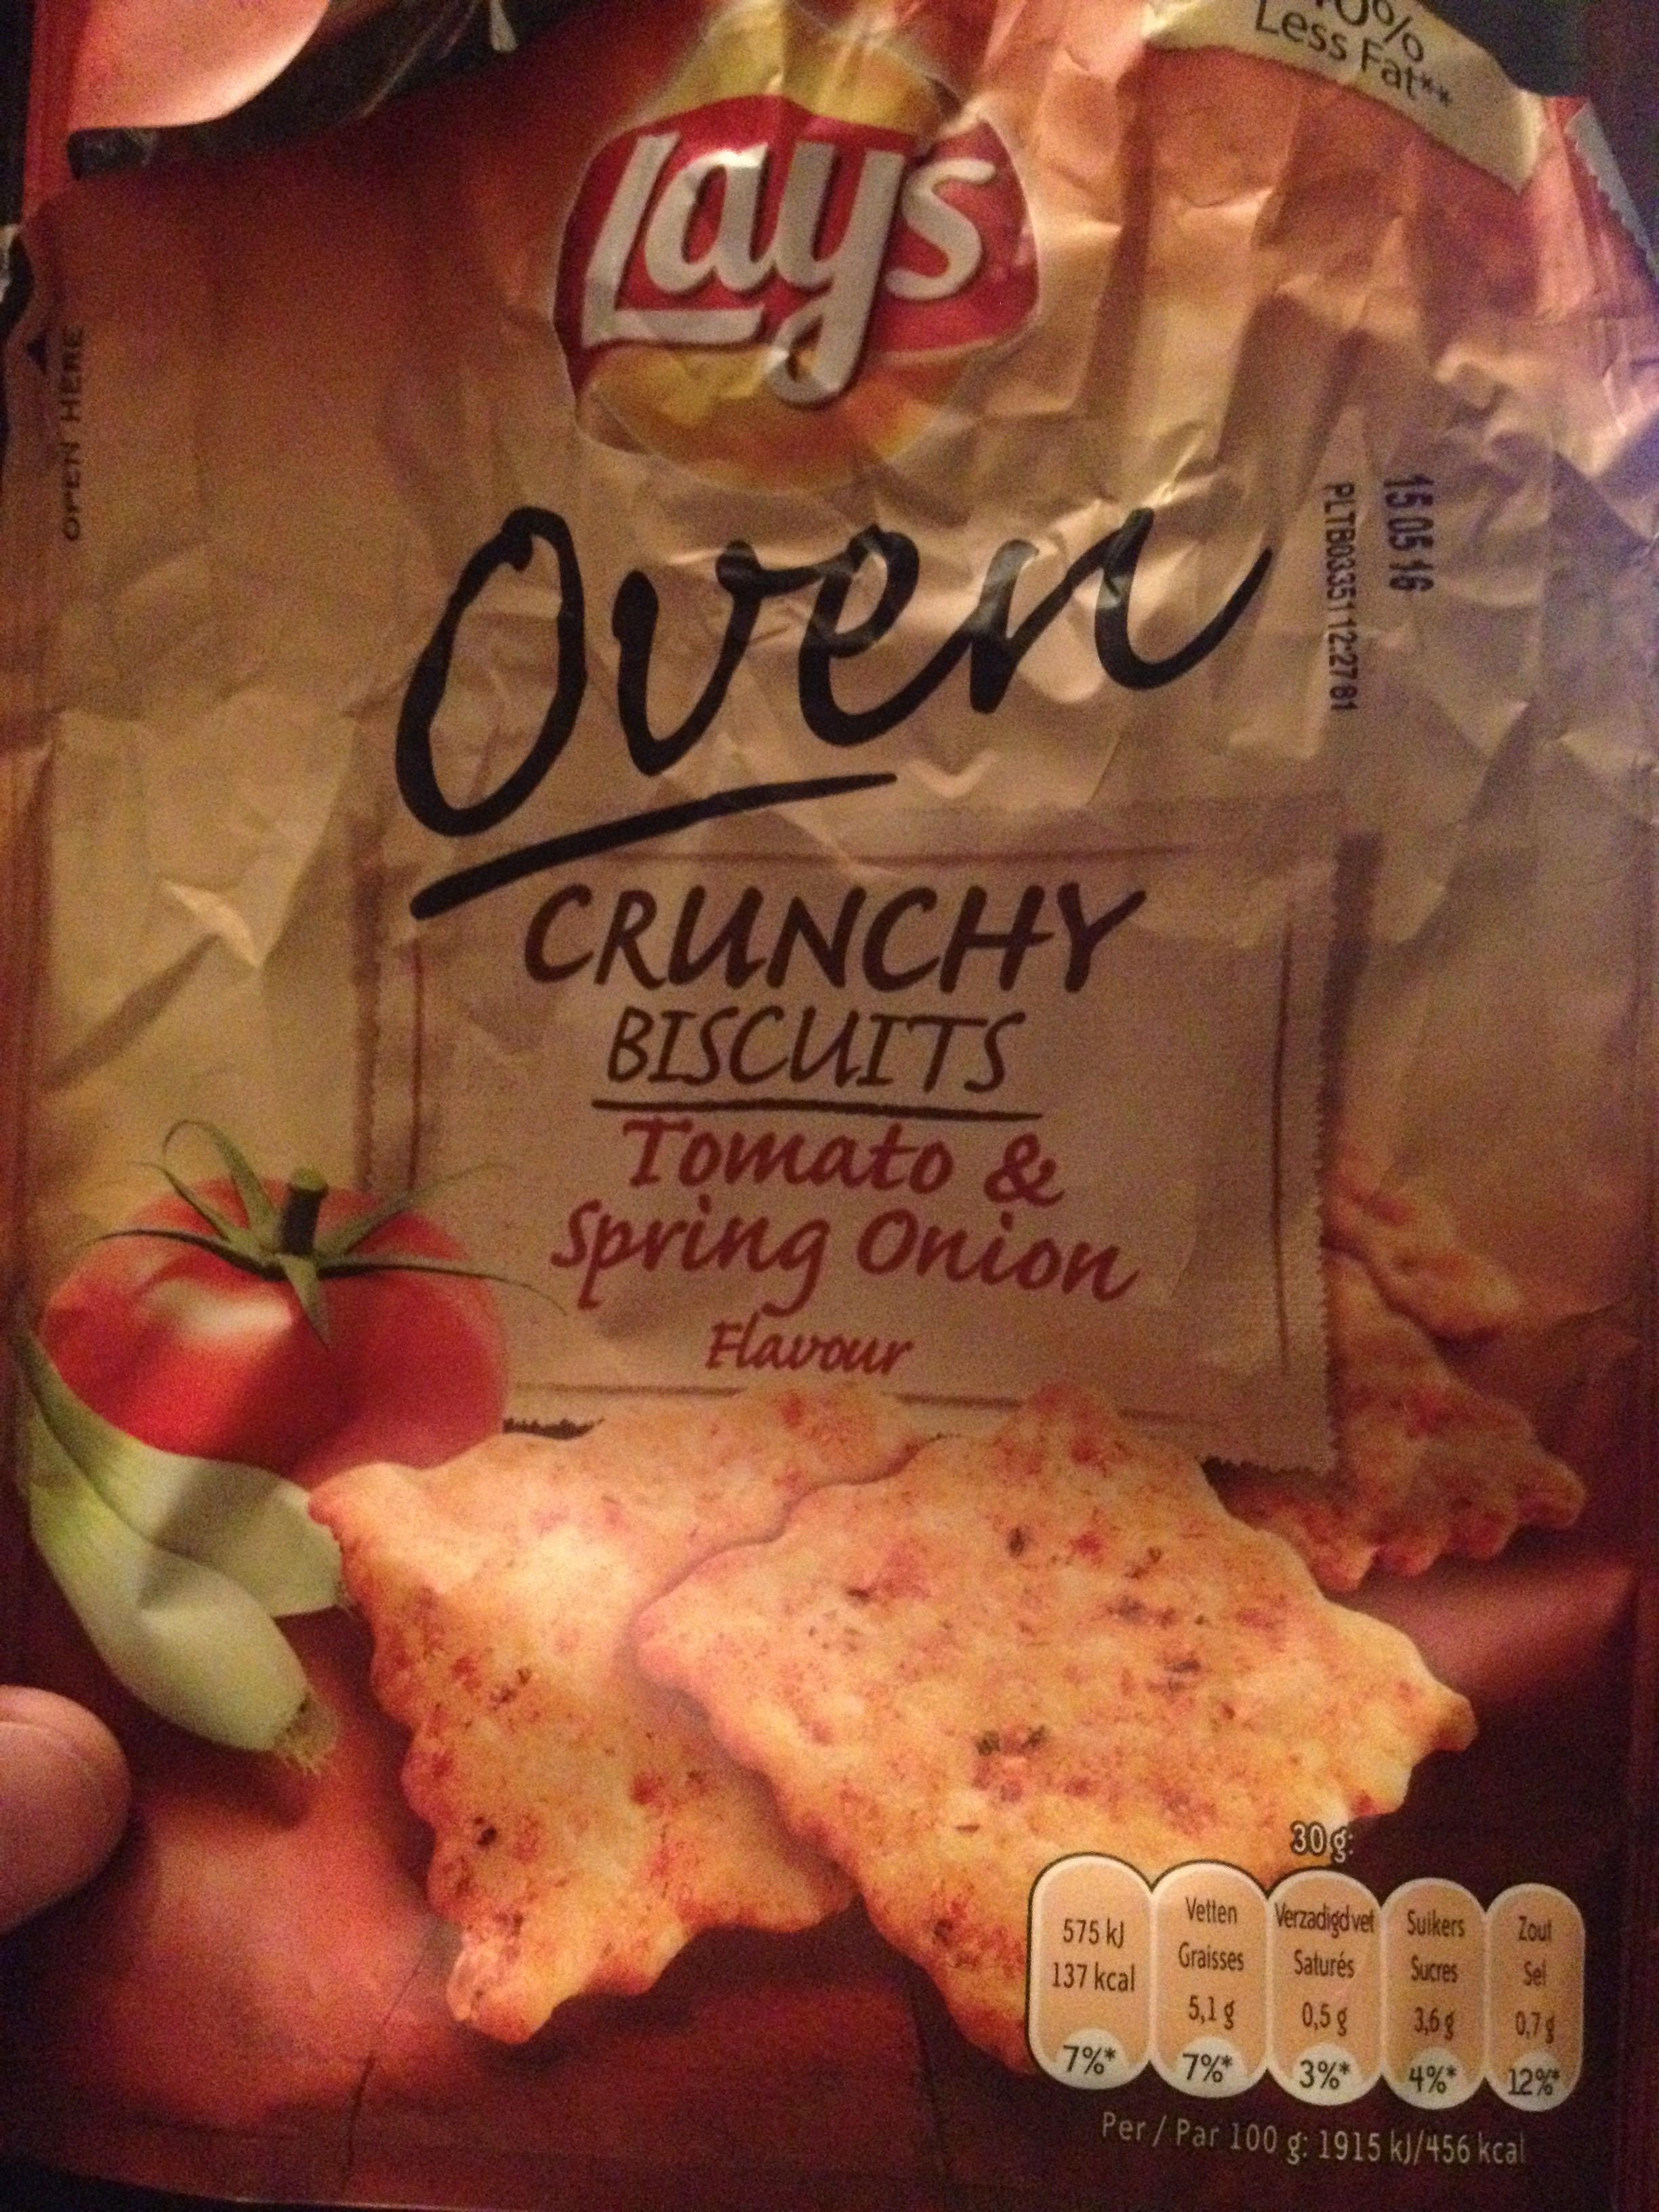 Lay's Oven Crunchy Bisc. Tomato&spring Onion 100g - Product - fr